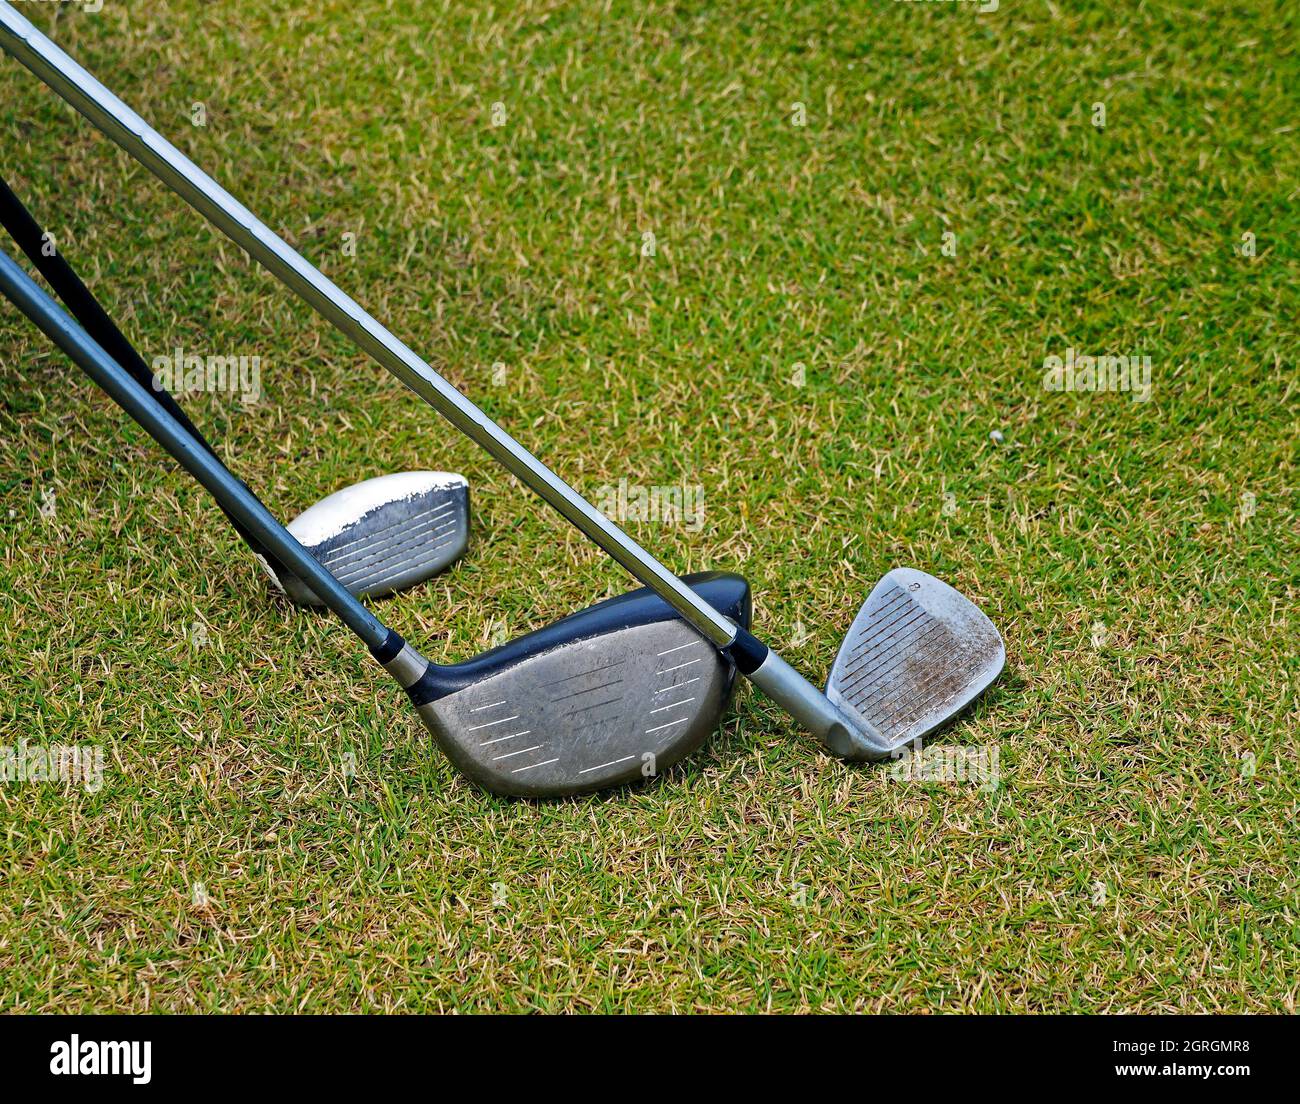 Page 2 - Grass No Objects High Resolution Stock Photography and Images -  Alamy